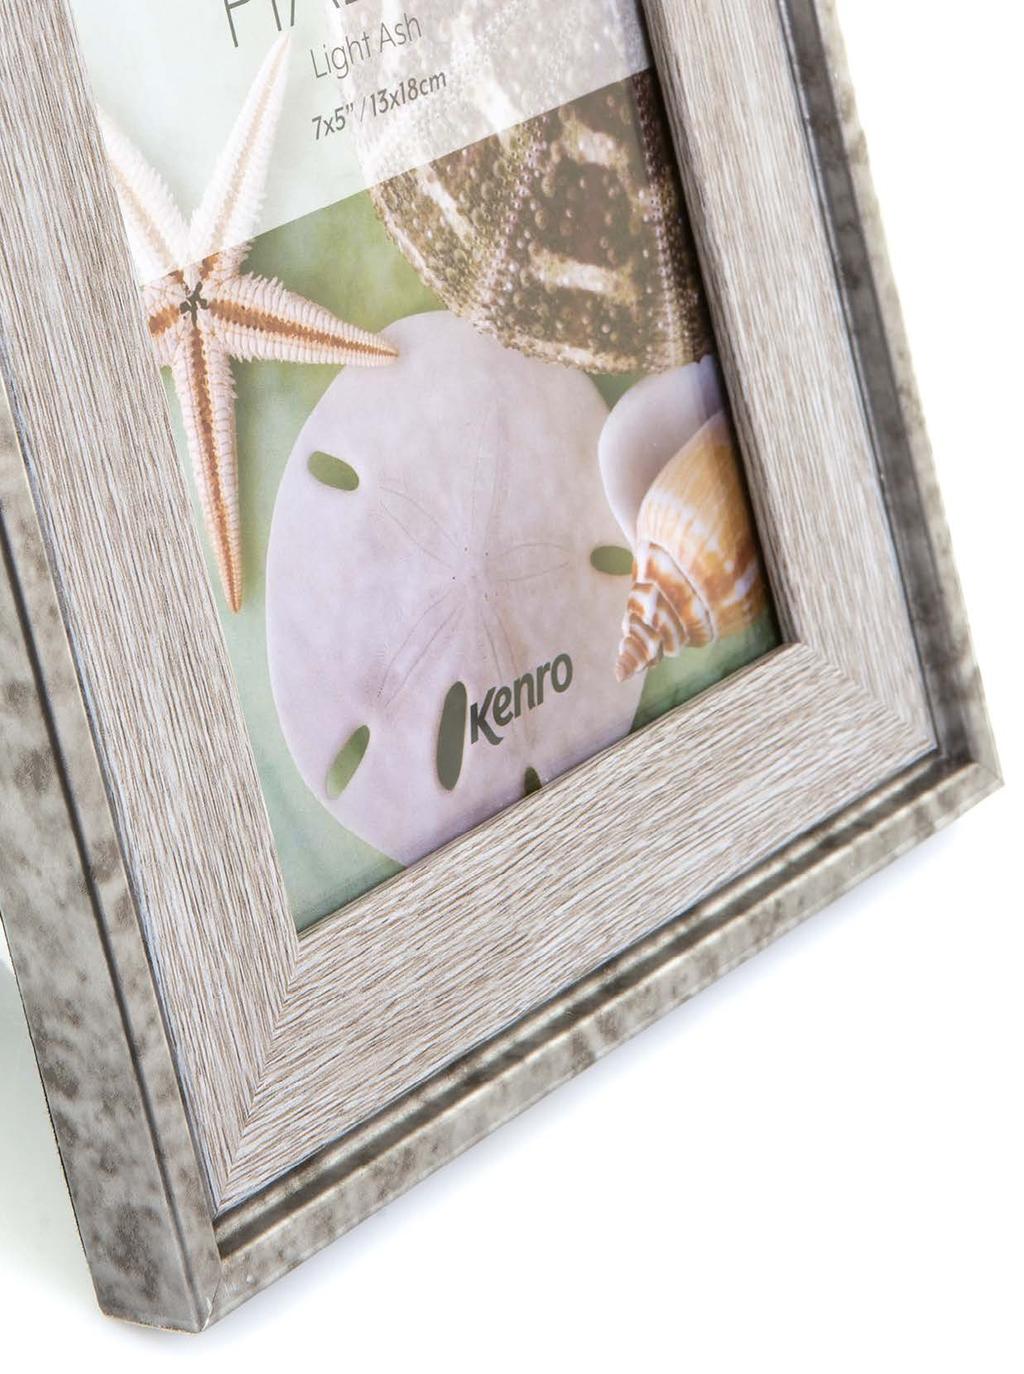 Piazza Series The Piazza Series is part of the Kenro home decor frame range.